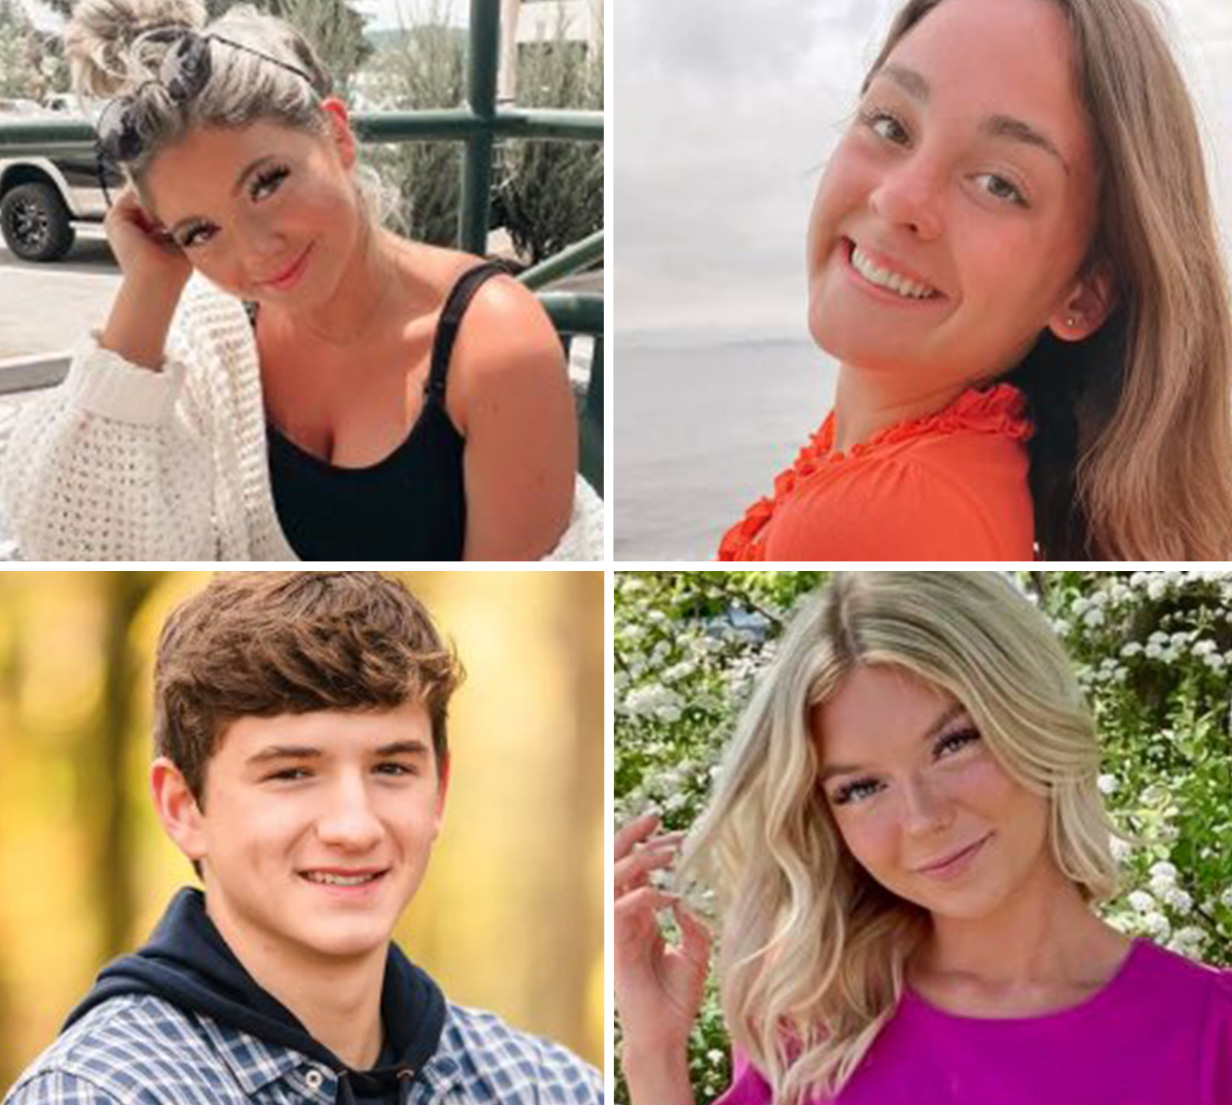 Idaho murders: Slain students' cars towed from crime scene two weeks after  grisly attack